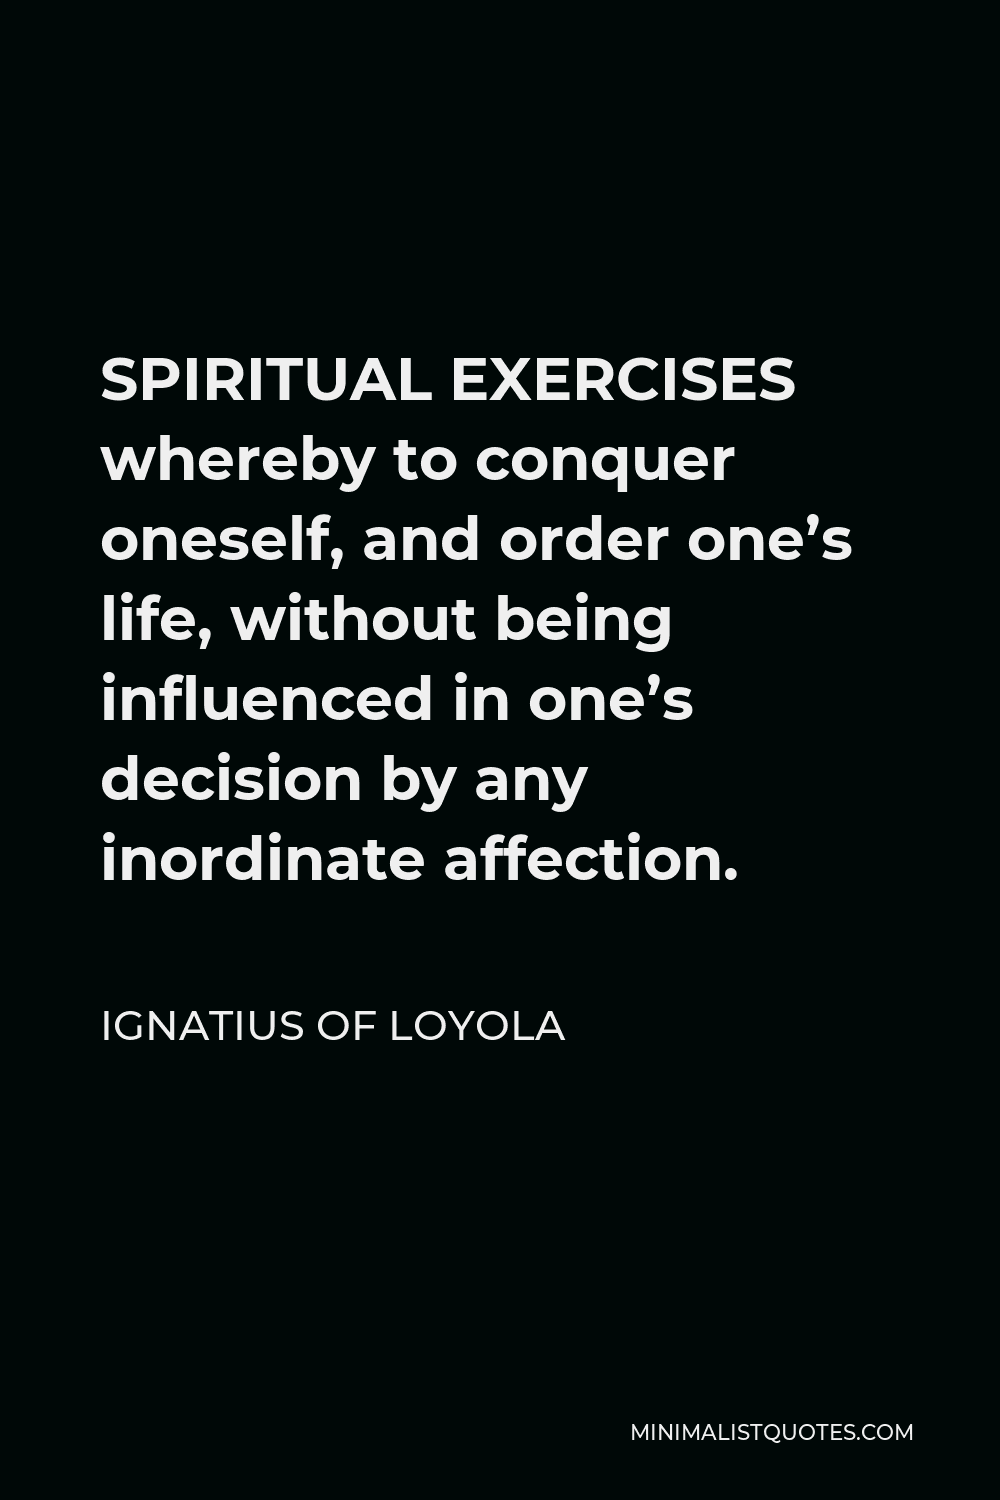 Ignatius of Loyola Quote - SPIRITUAL EXERCISES whereby to conquer oneself, and order one’s life, without being influenced in one’s decision by any inordinate affection.